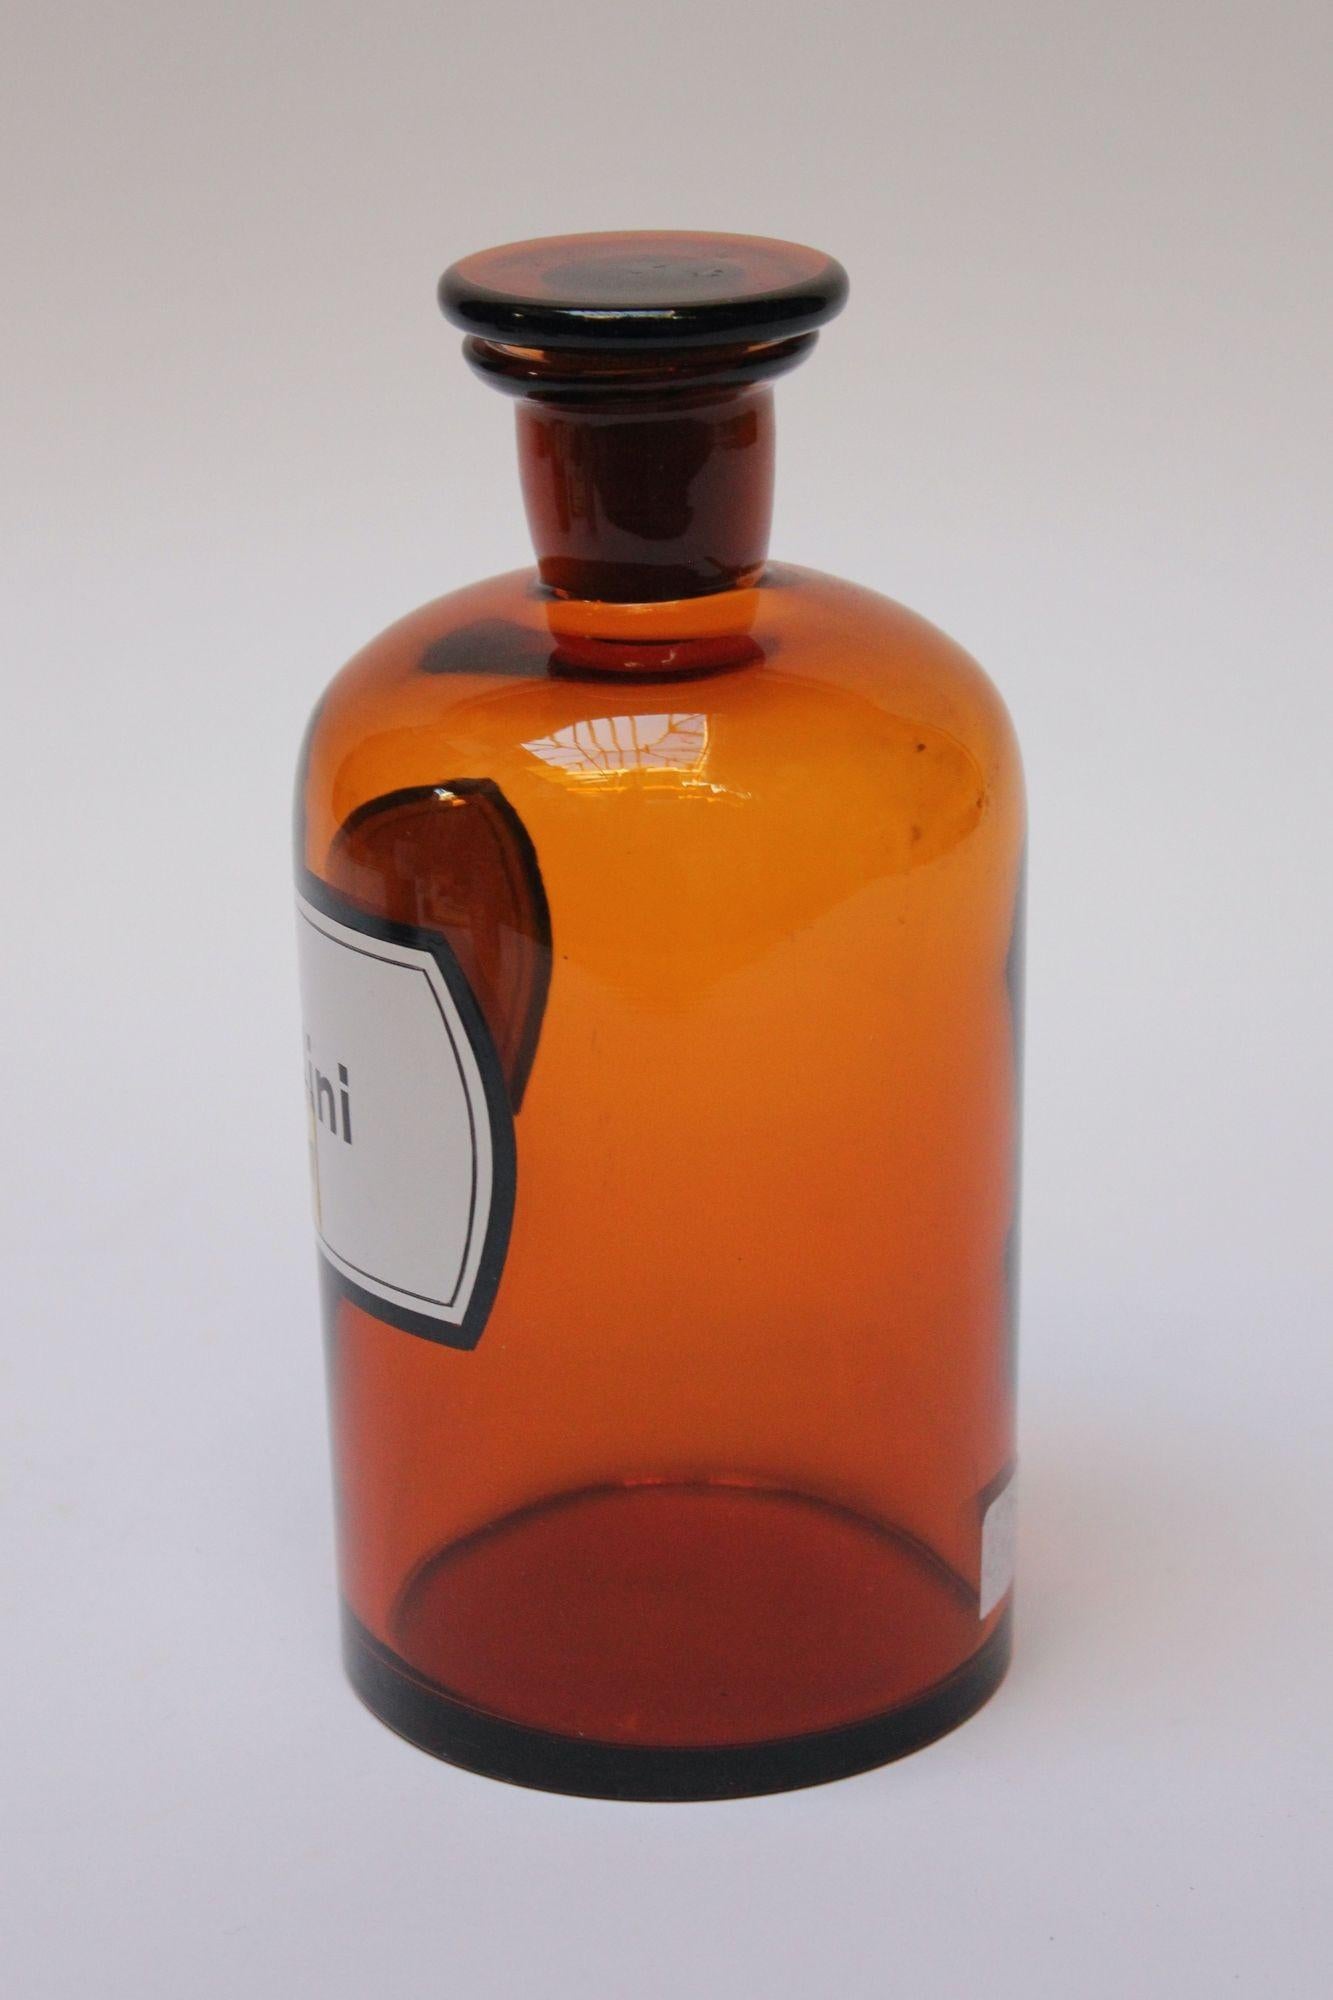 'Ol. Vaselini' pharmacy bottle / apothecary jar (circa late 1920s / early 1930s, Germany).
Amber glass with button stopper and enamel label. 